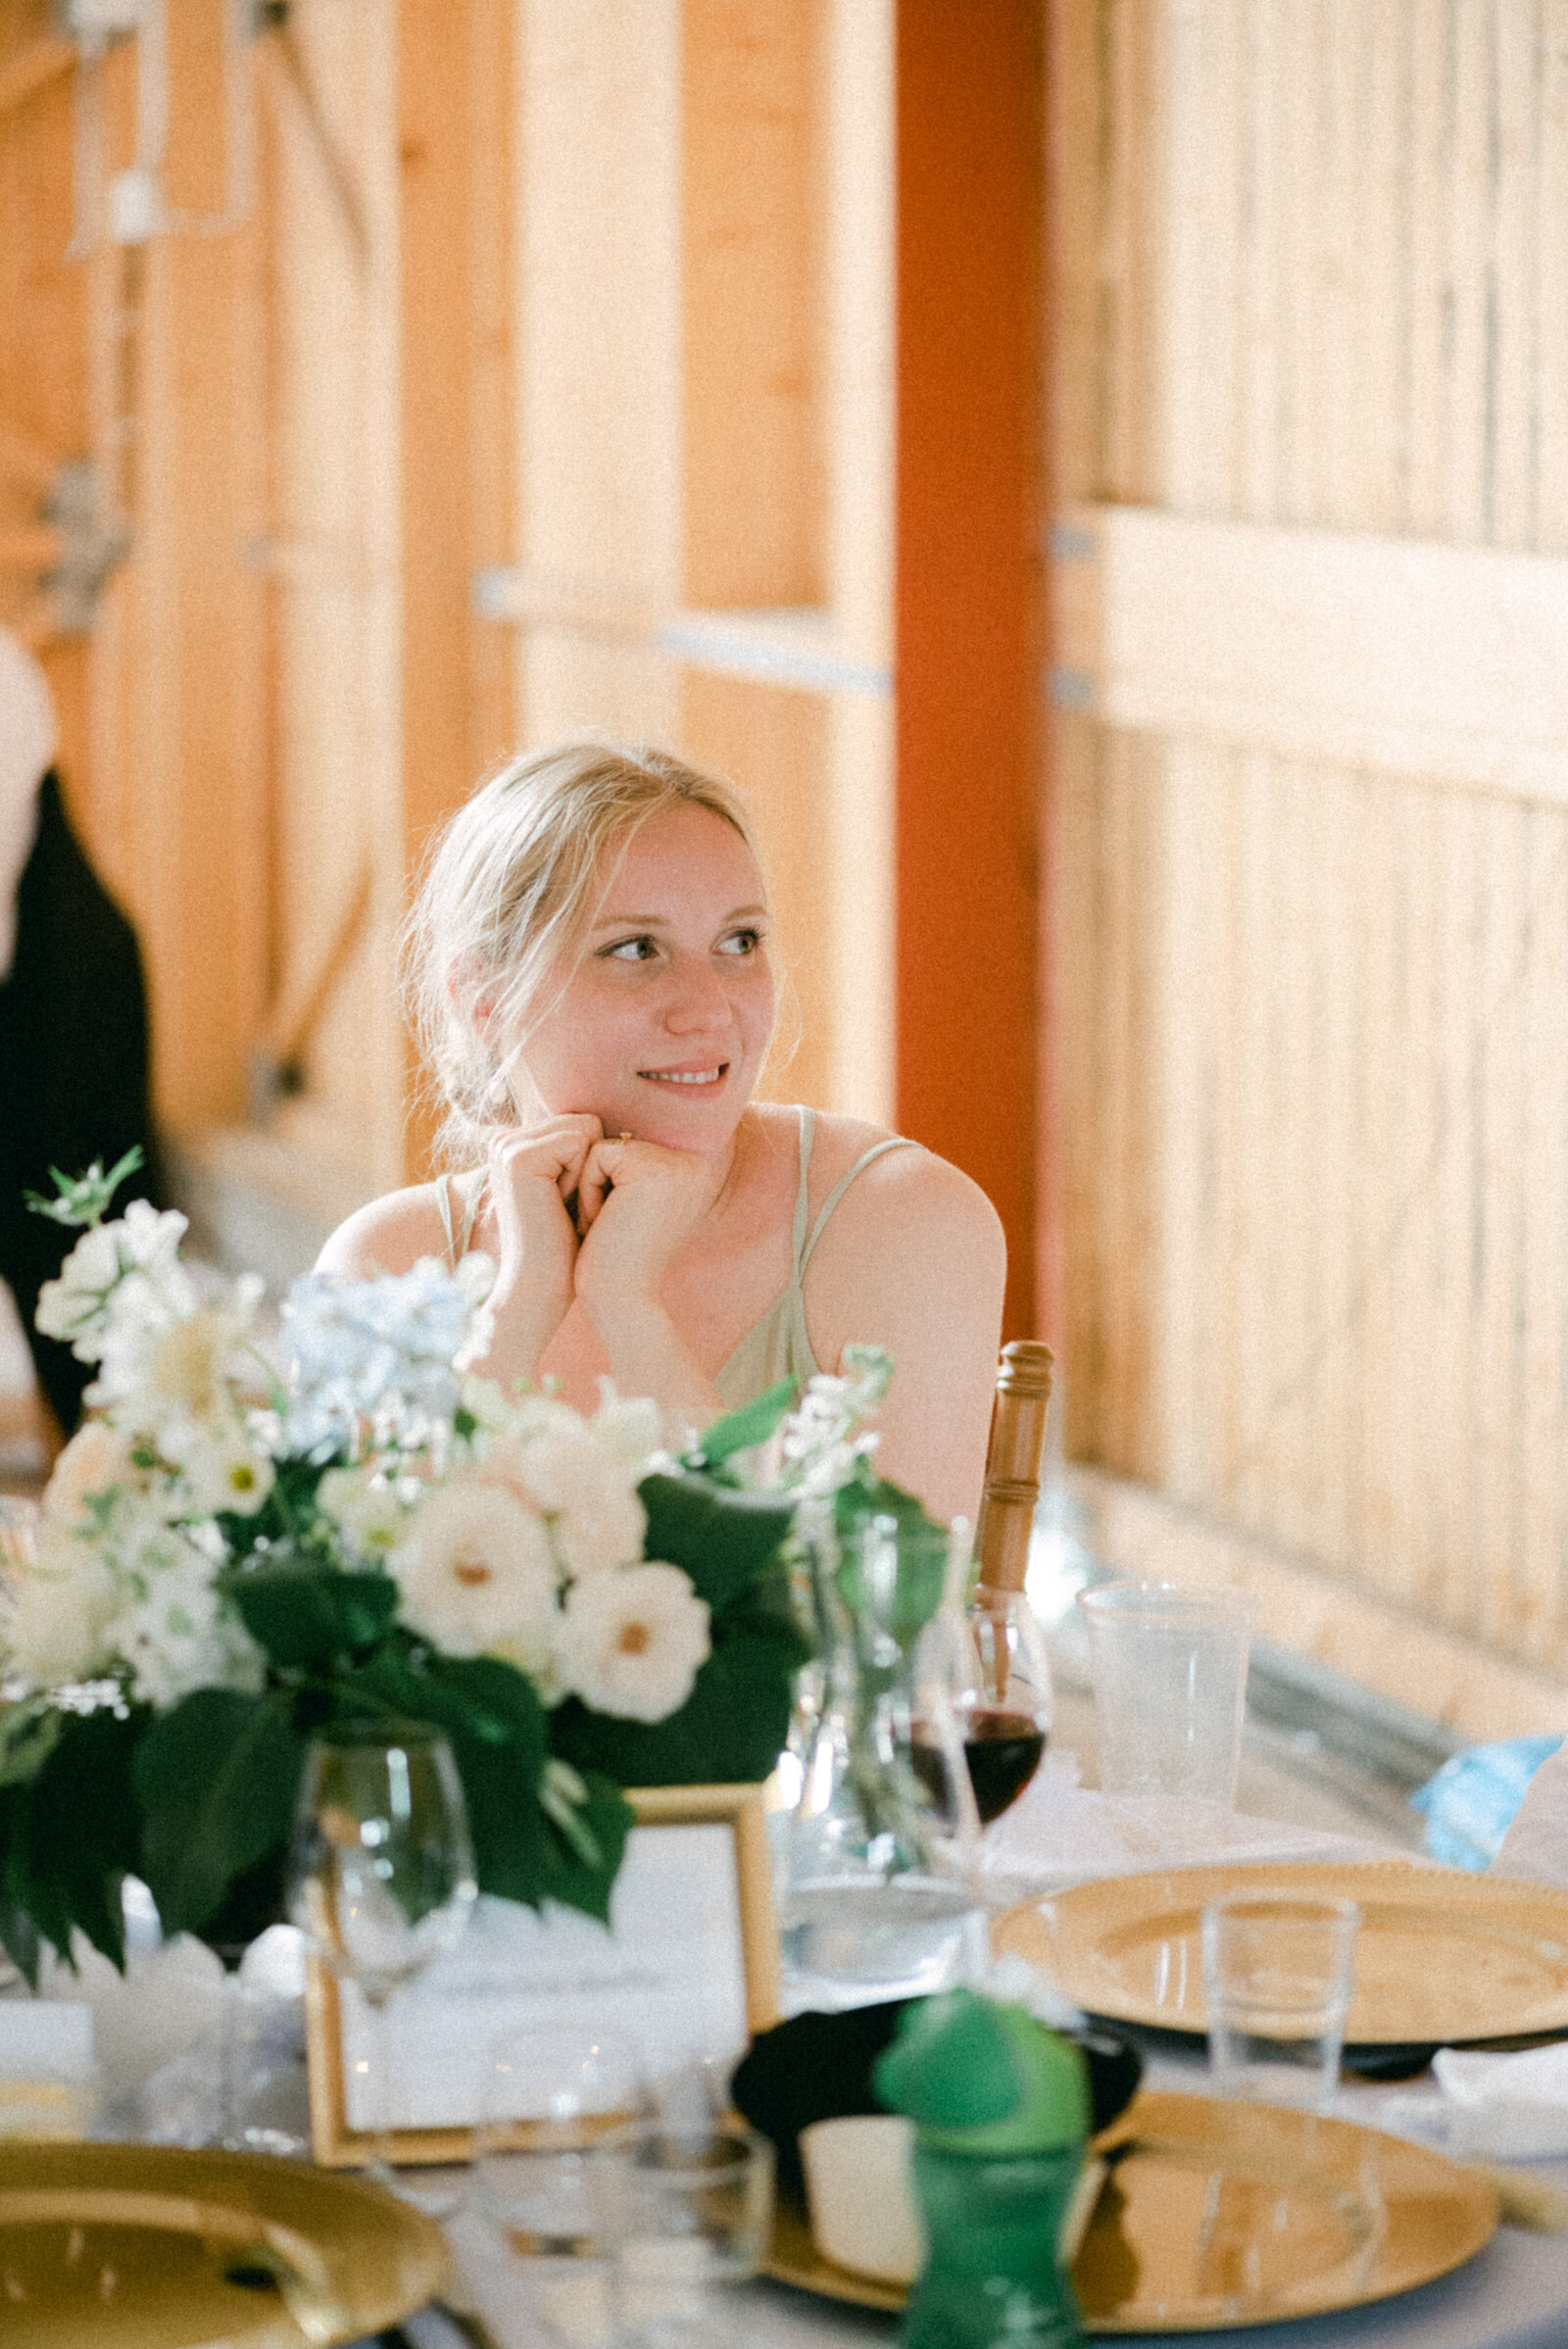 A guest in the wedding in an image captured by wedding photographer Hannika Gabrielsson.